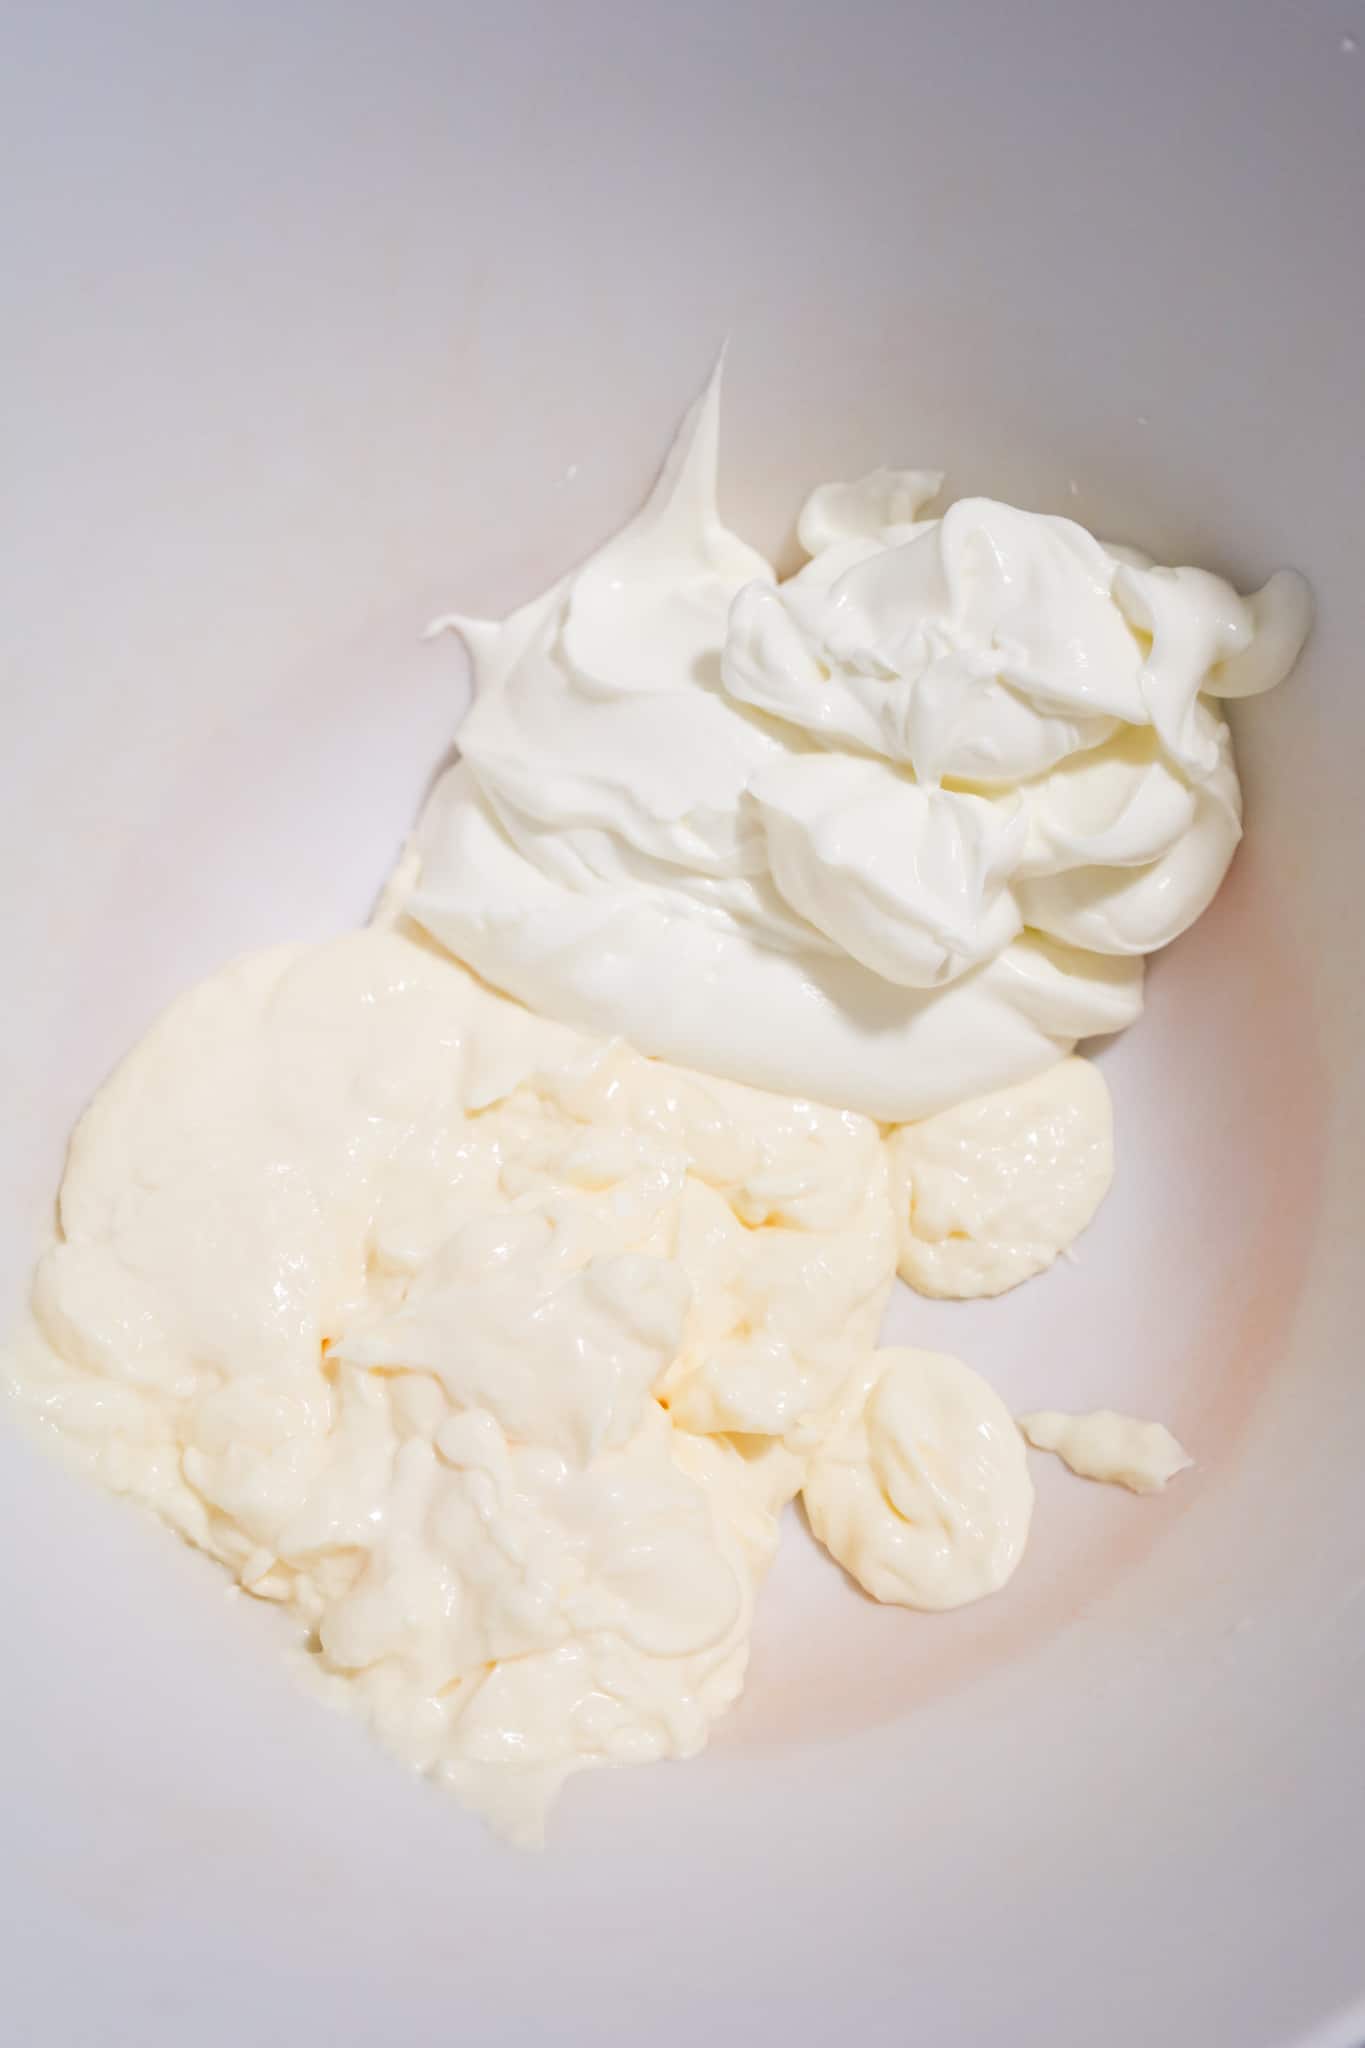 sour cream and mayo mixture in a mixing bowl